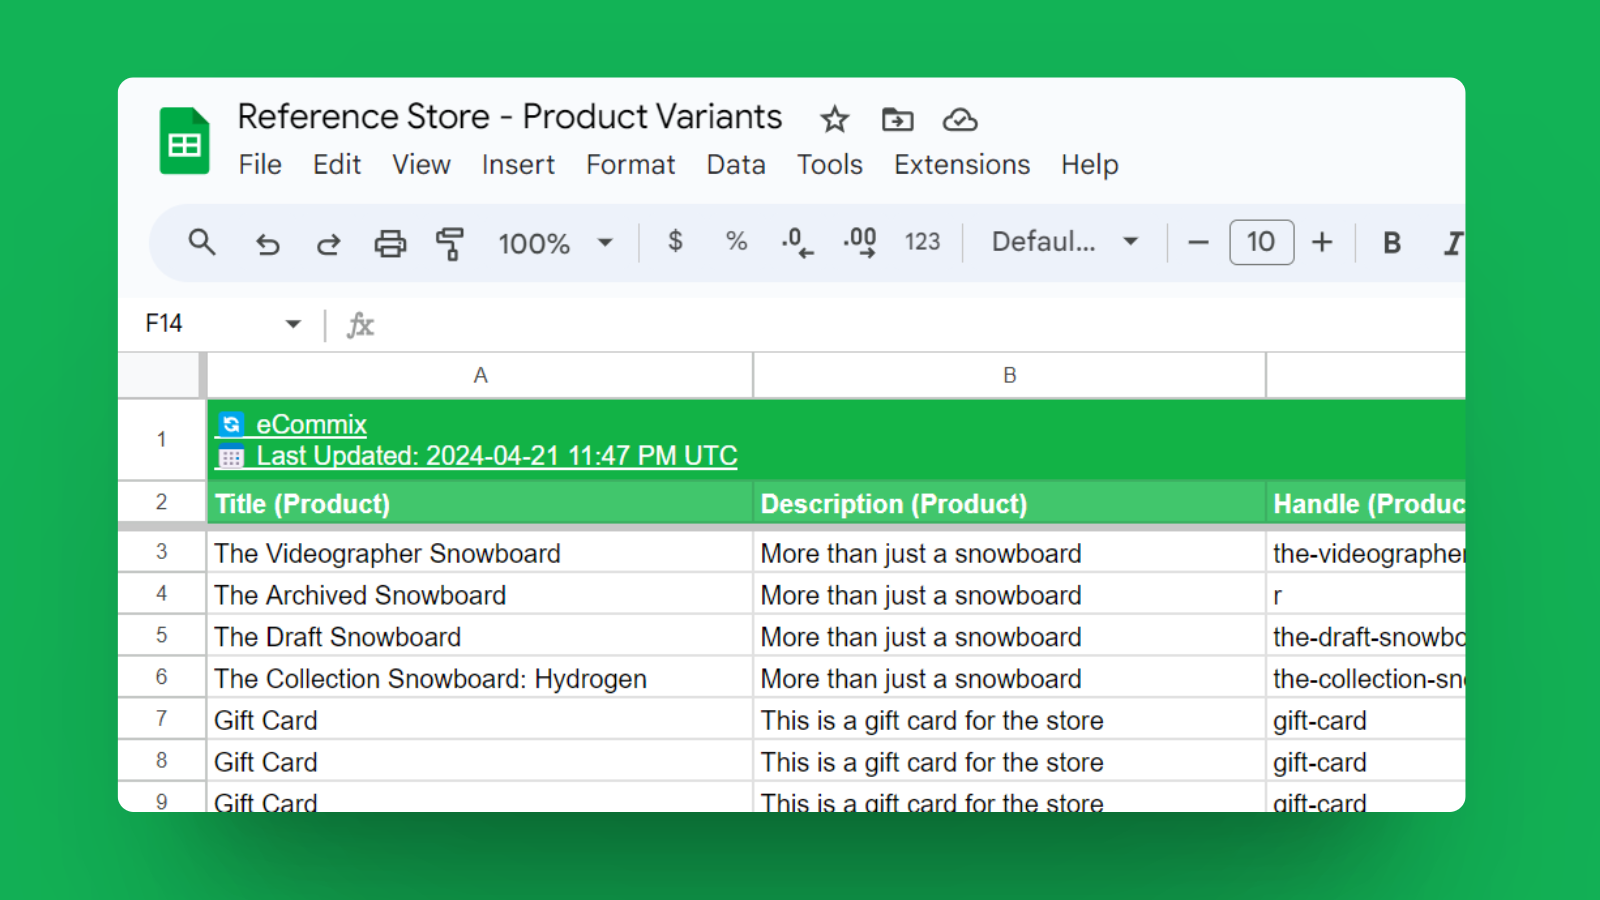 Connect your Shopify data to Google Sheets